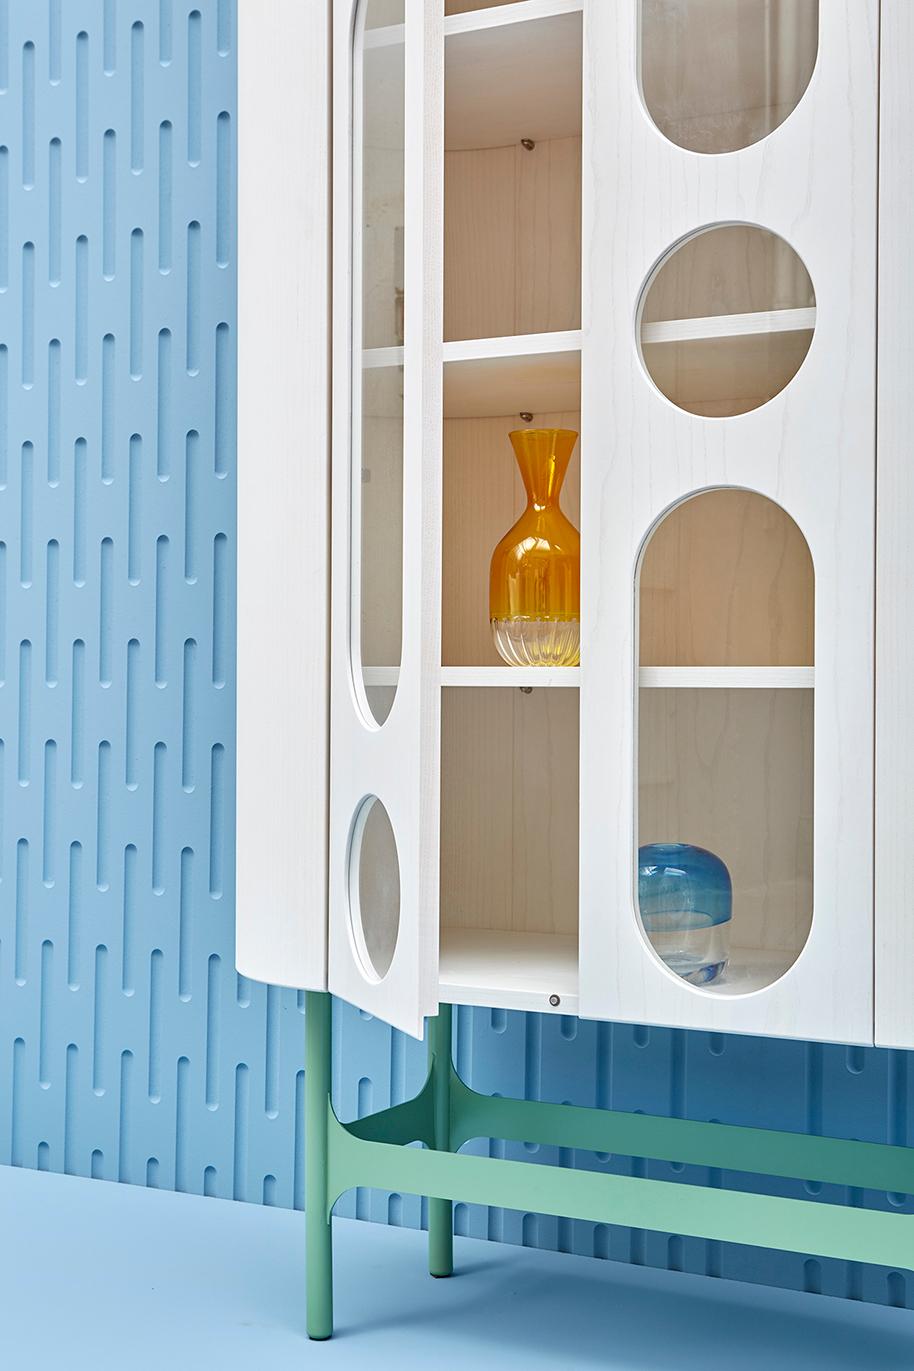 Oblò B cabinet / Colorama Collection by Matteo Zorzenoni

Oblò is a collection of cabinets and cupboards with strong personalities. Circular and oblong holes covered in glass characterize the surfaces of the doors and allow a glimpse of what is